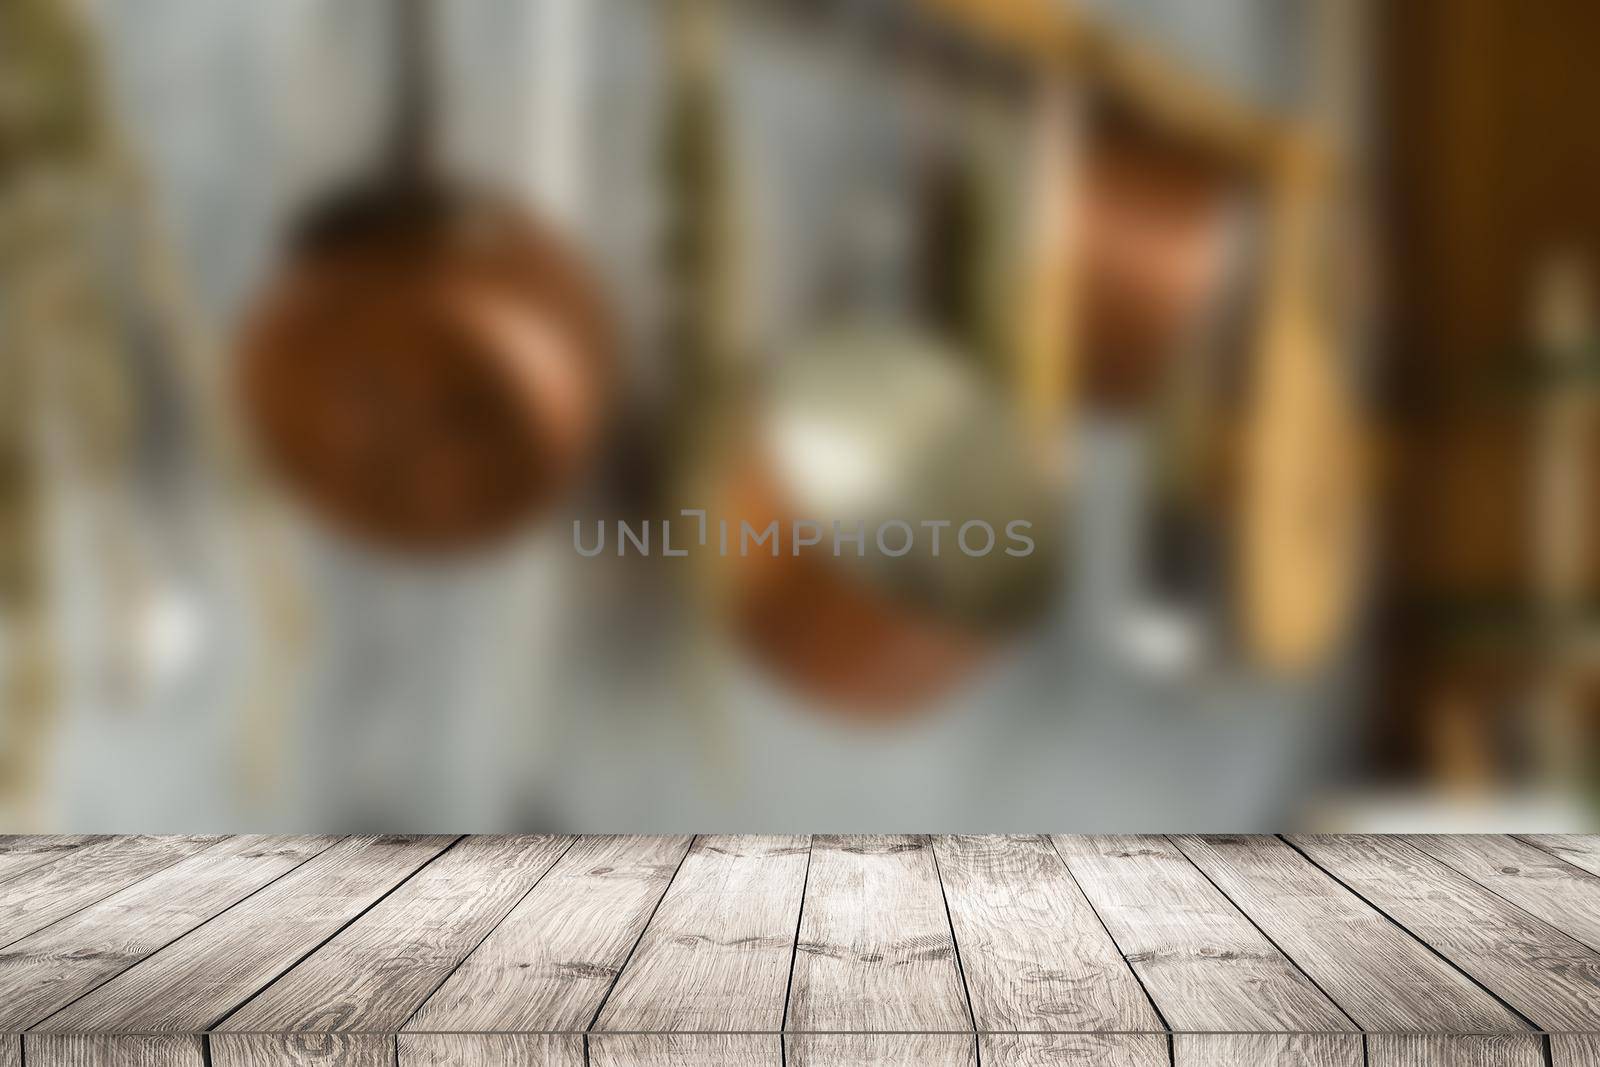 Baking ingredients placed on wooden table, ready for cooking. Copyspace for text. Concept of food preparation, kitchen on background